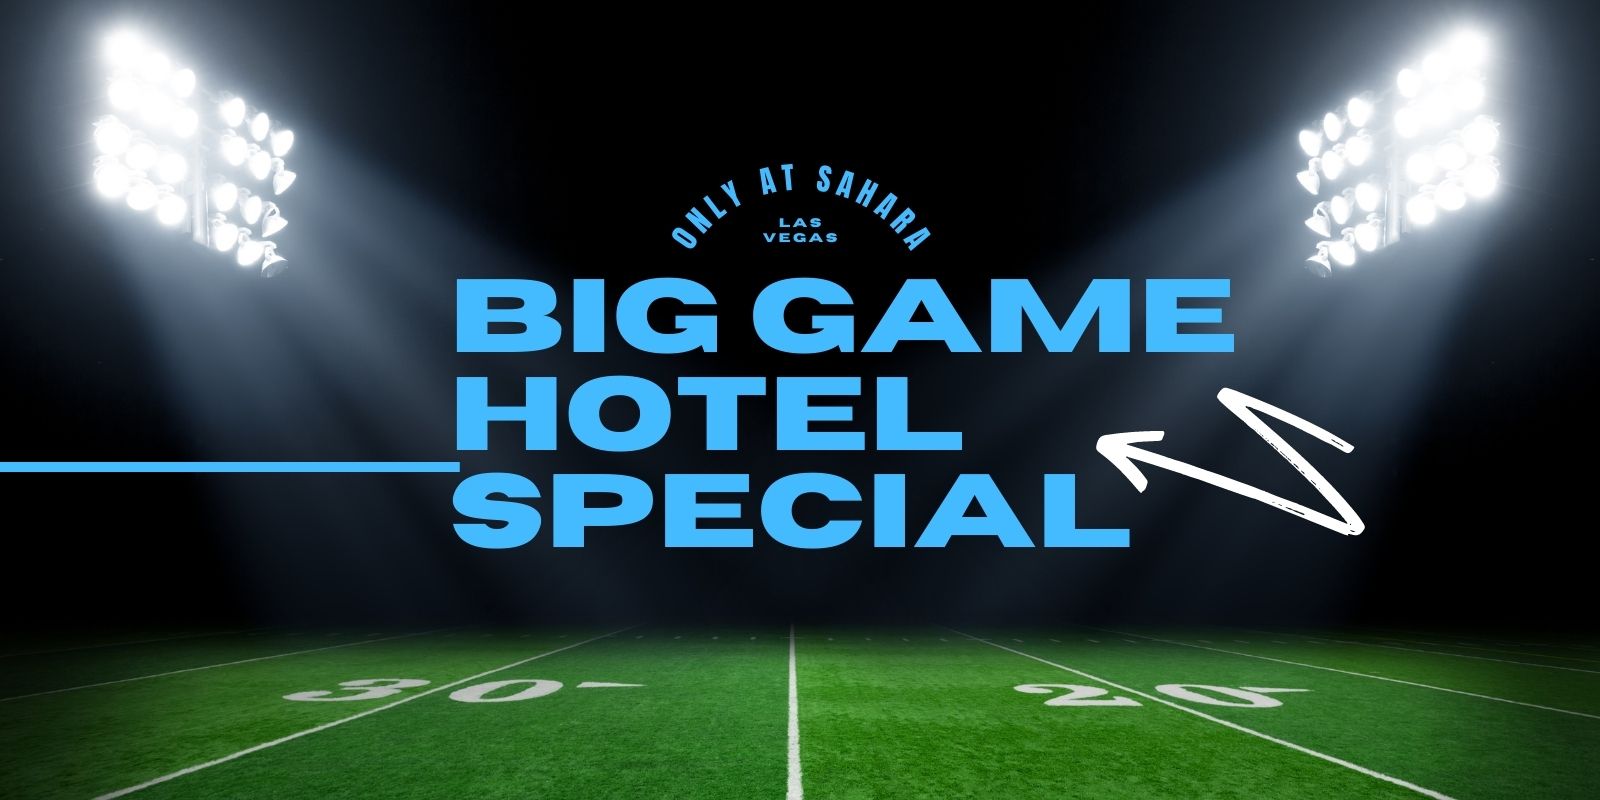 Big Game hotel special copy against football stadium background